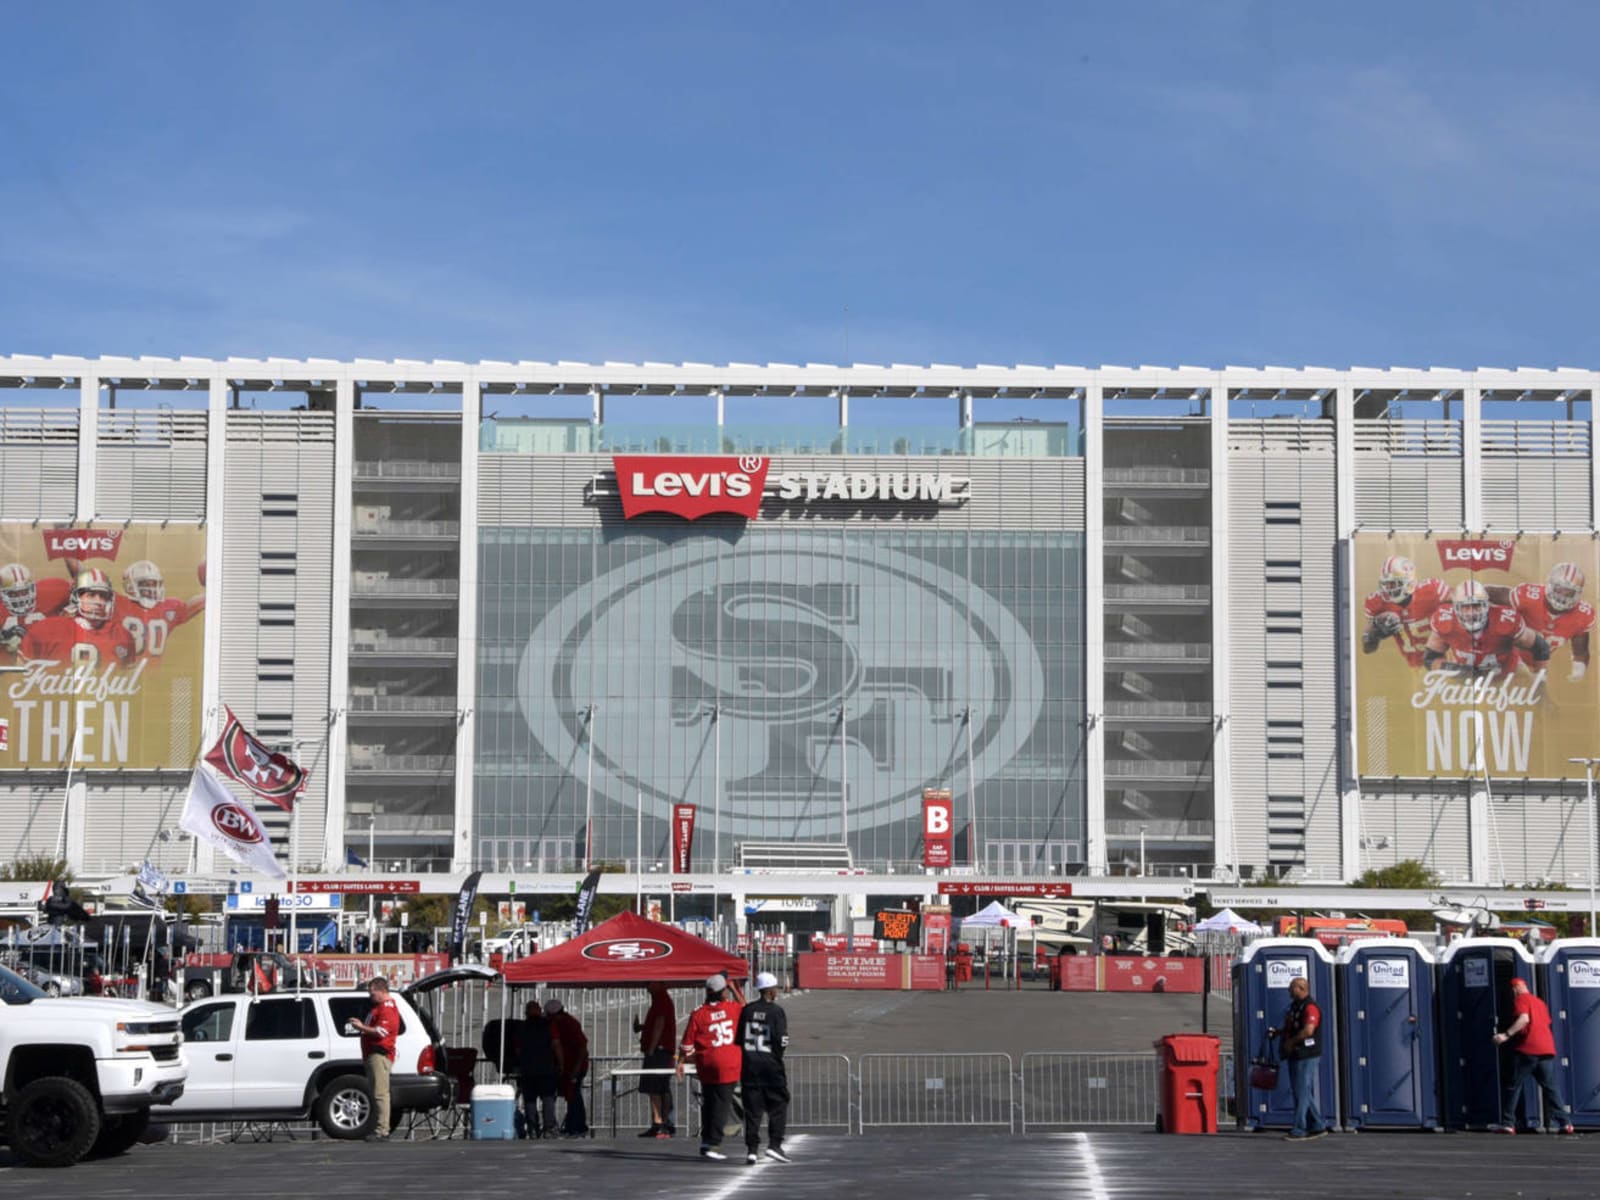 49ers have offered to share Levi's Stadium with Raiders in 2019 | Yardbarker